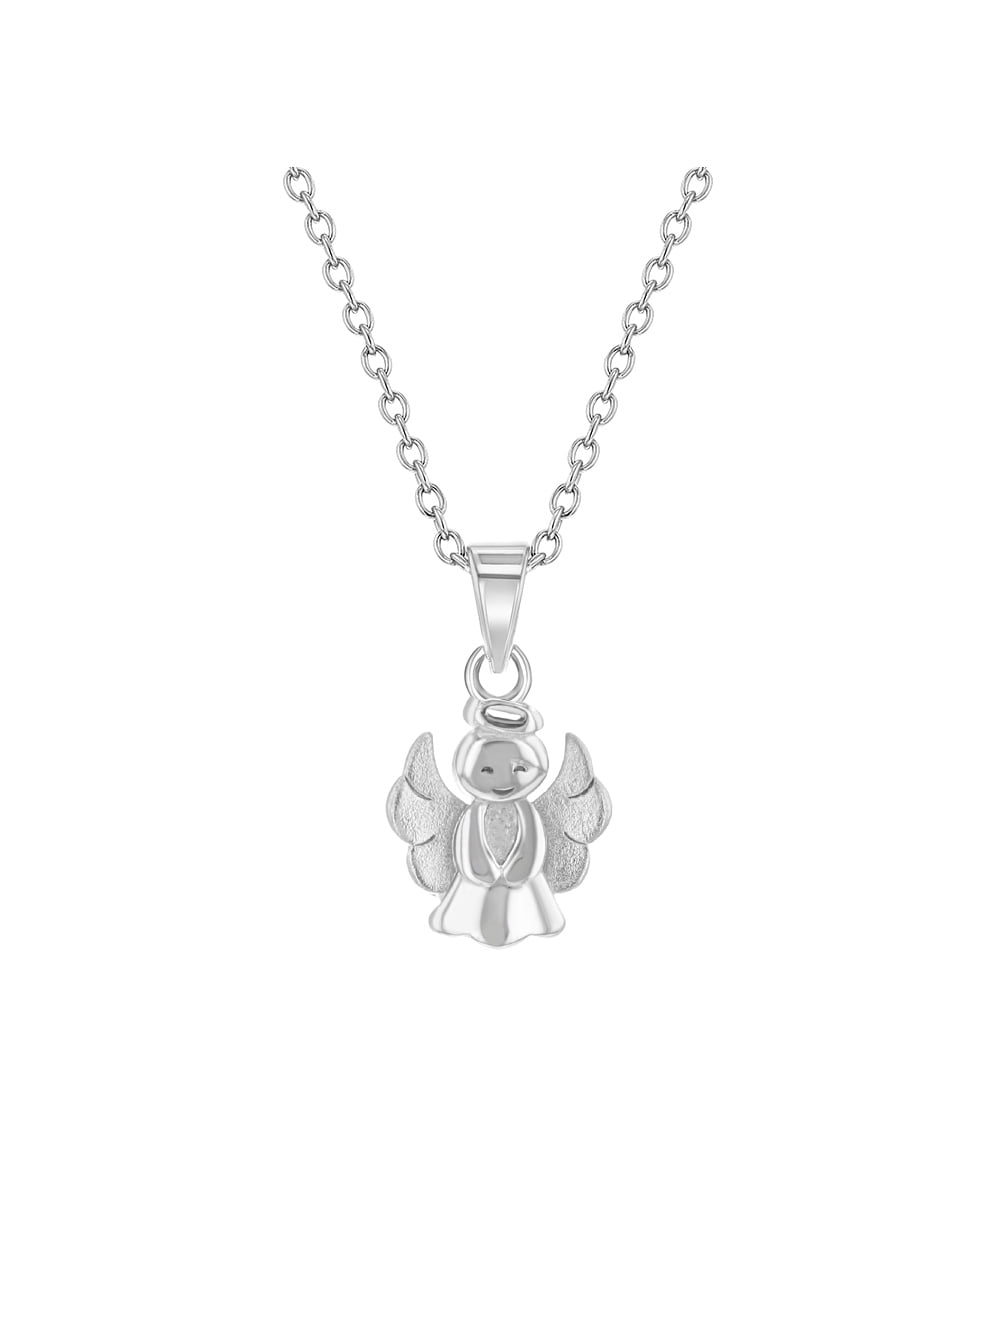 925 Sterling Silver Classic Braided Claddagh Charm Pendant Necklace